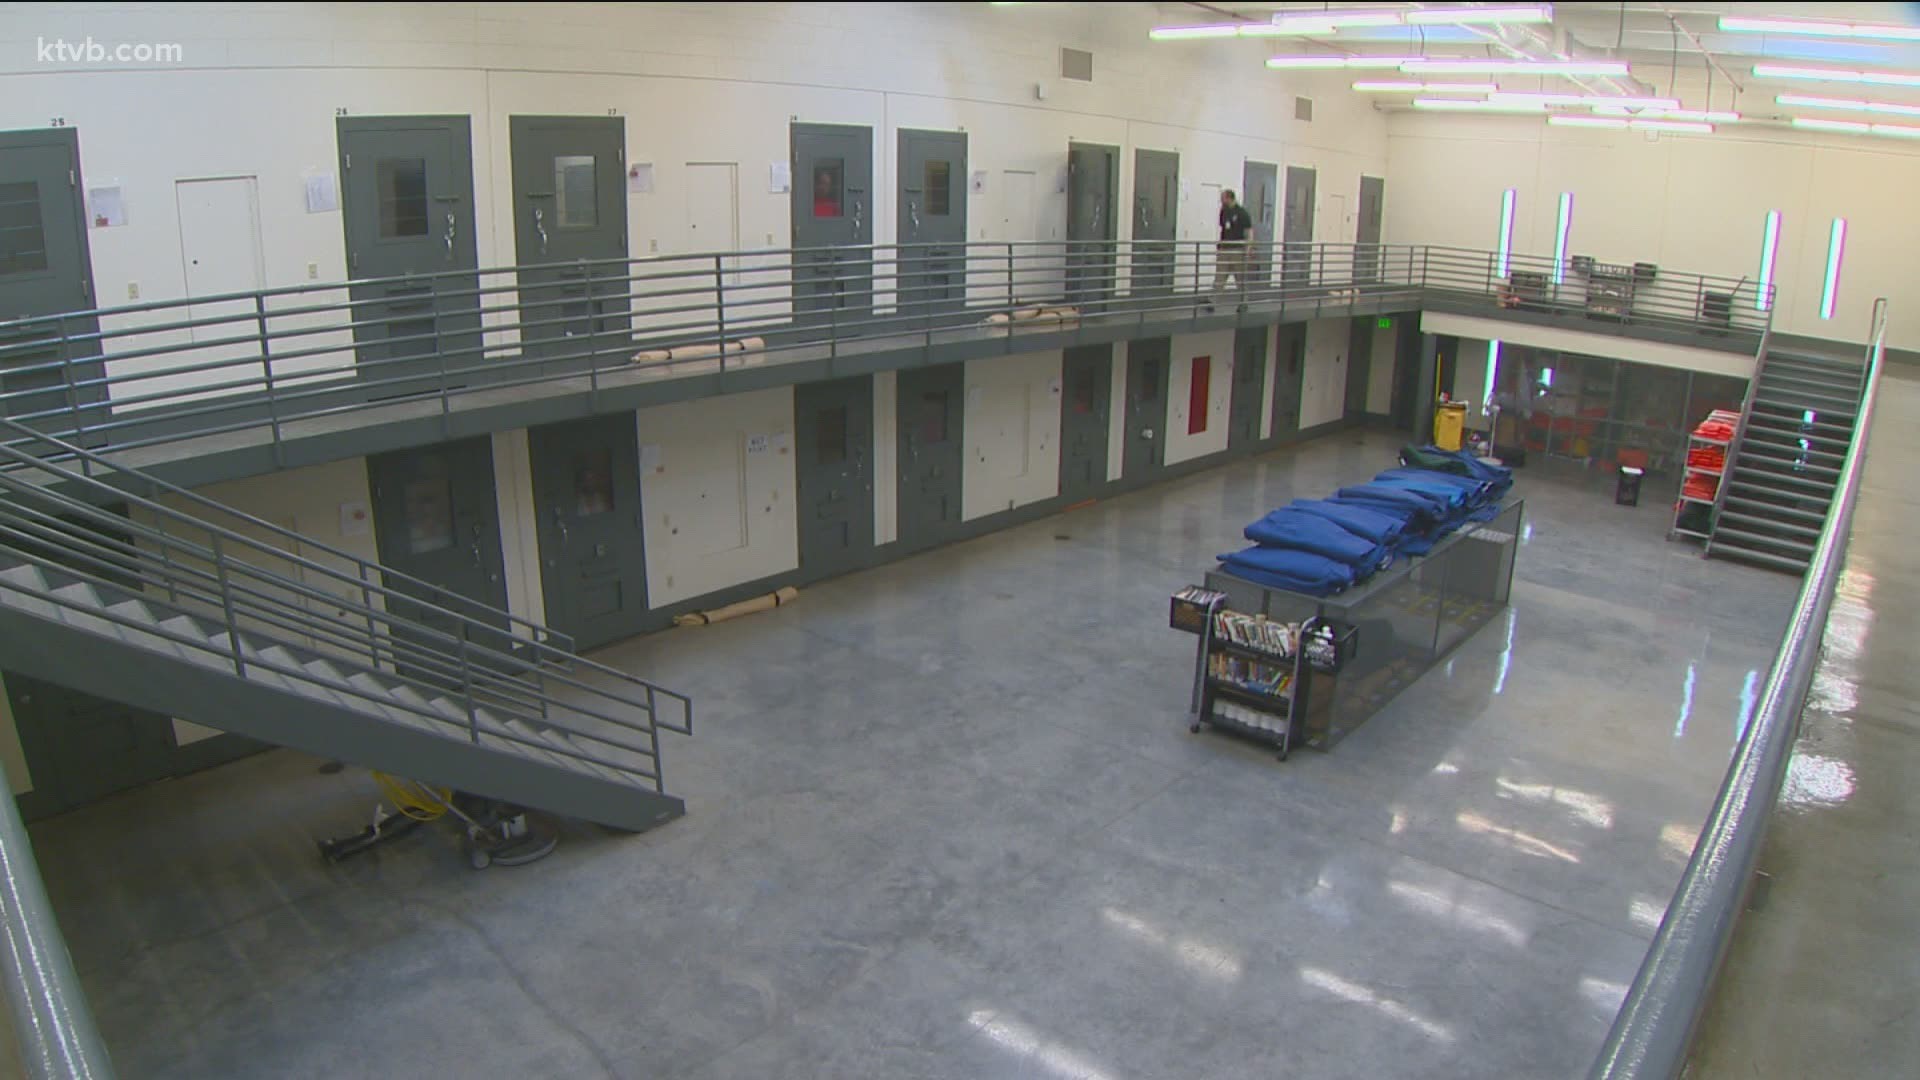 A total of 181 correctional officer positions are currently vacant statewide, leaving Idaho prisons just 76% staffed.